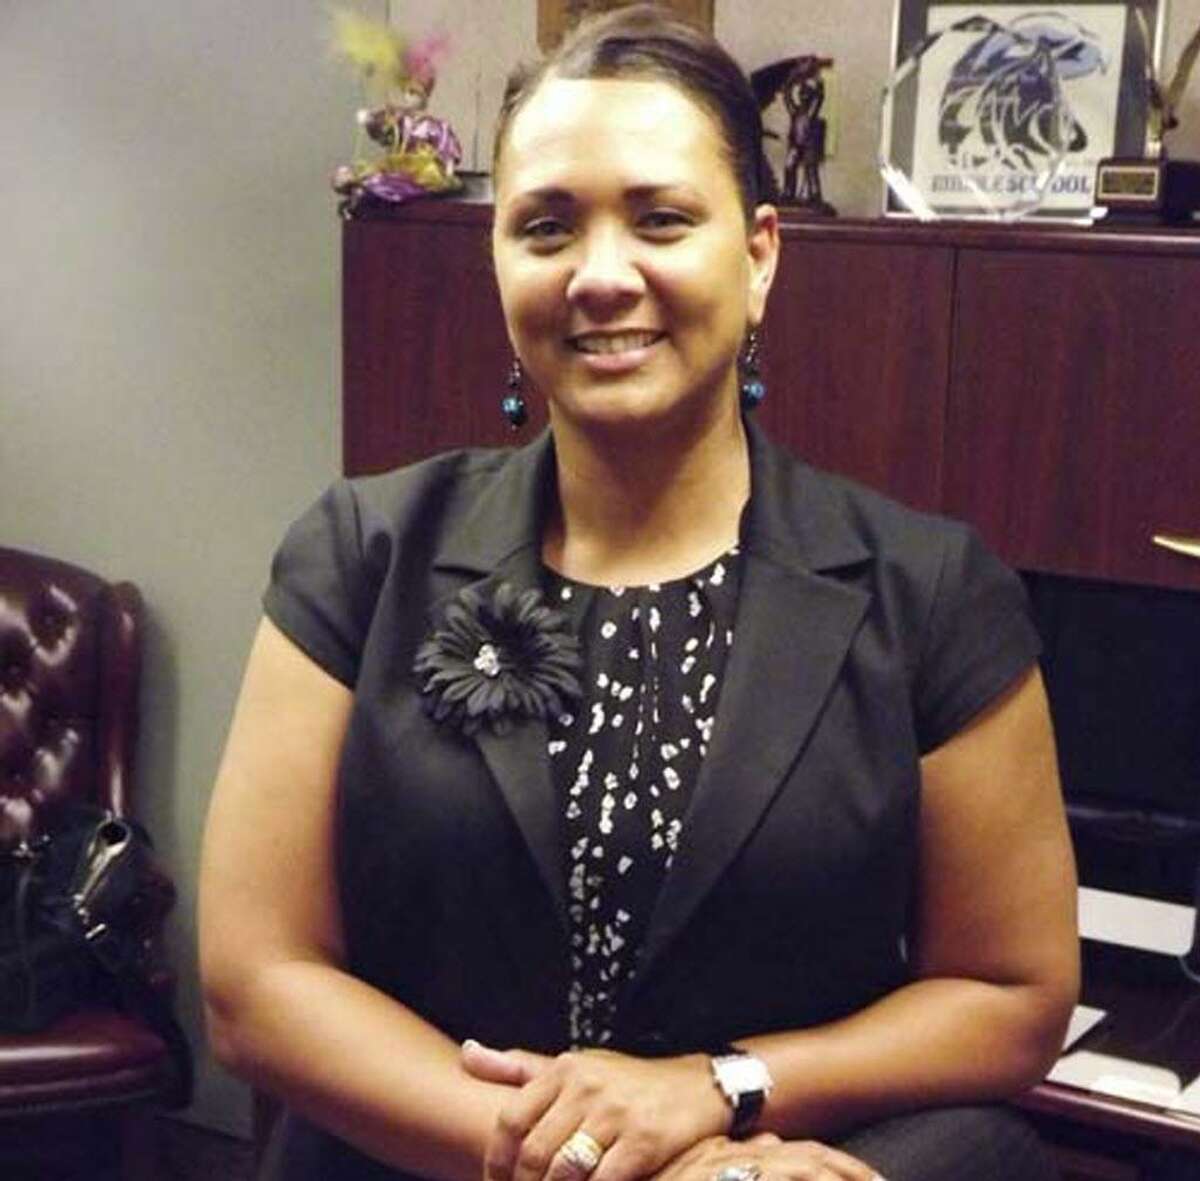 Katrise Perera is once again a candidate for Bridgeport Public Schools Superintendent